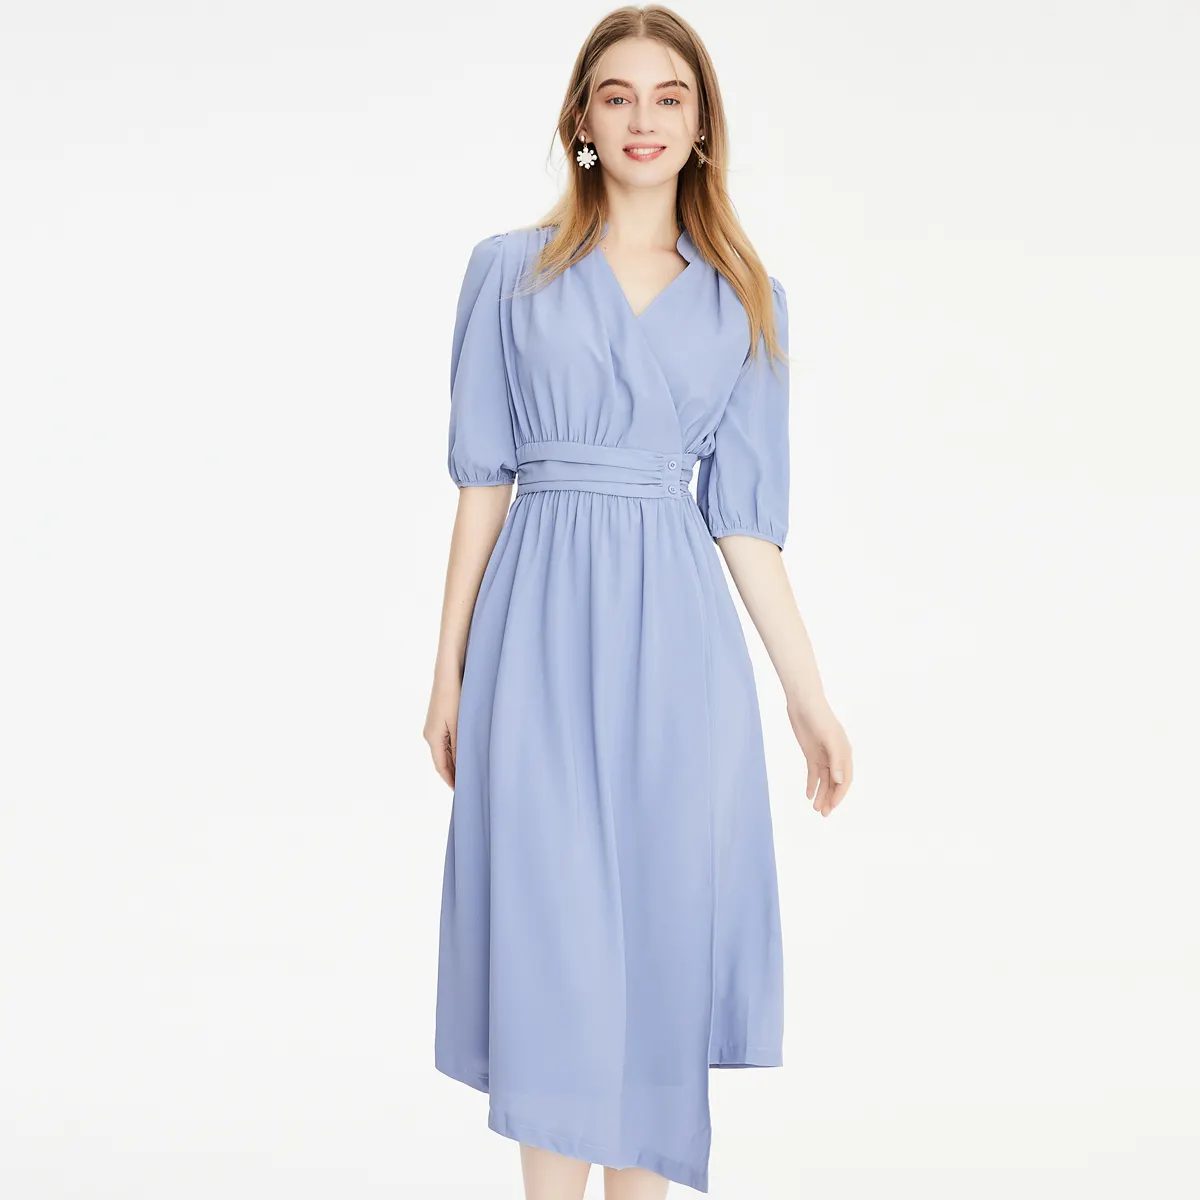 Refreshing Dresses Woman Summer 2021 Short Sleeve Shirt Unicolor Casual Muslin Ruched Loose Dresses Q92262 Blue Vintage Woven